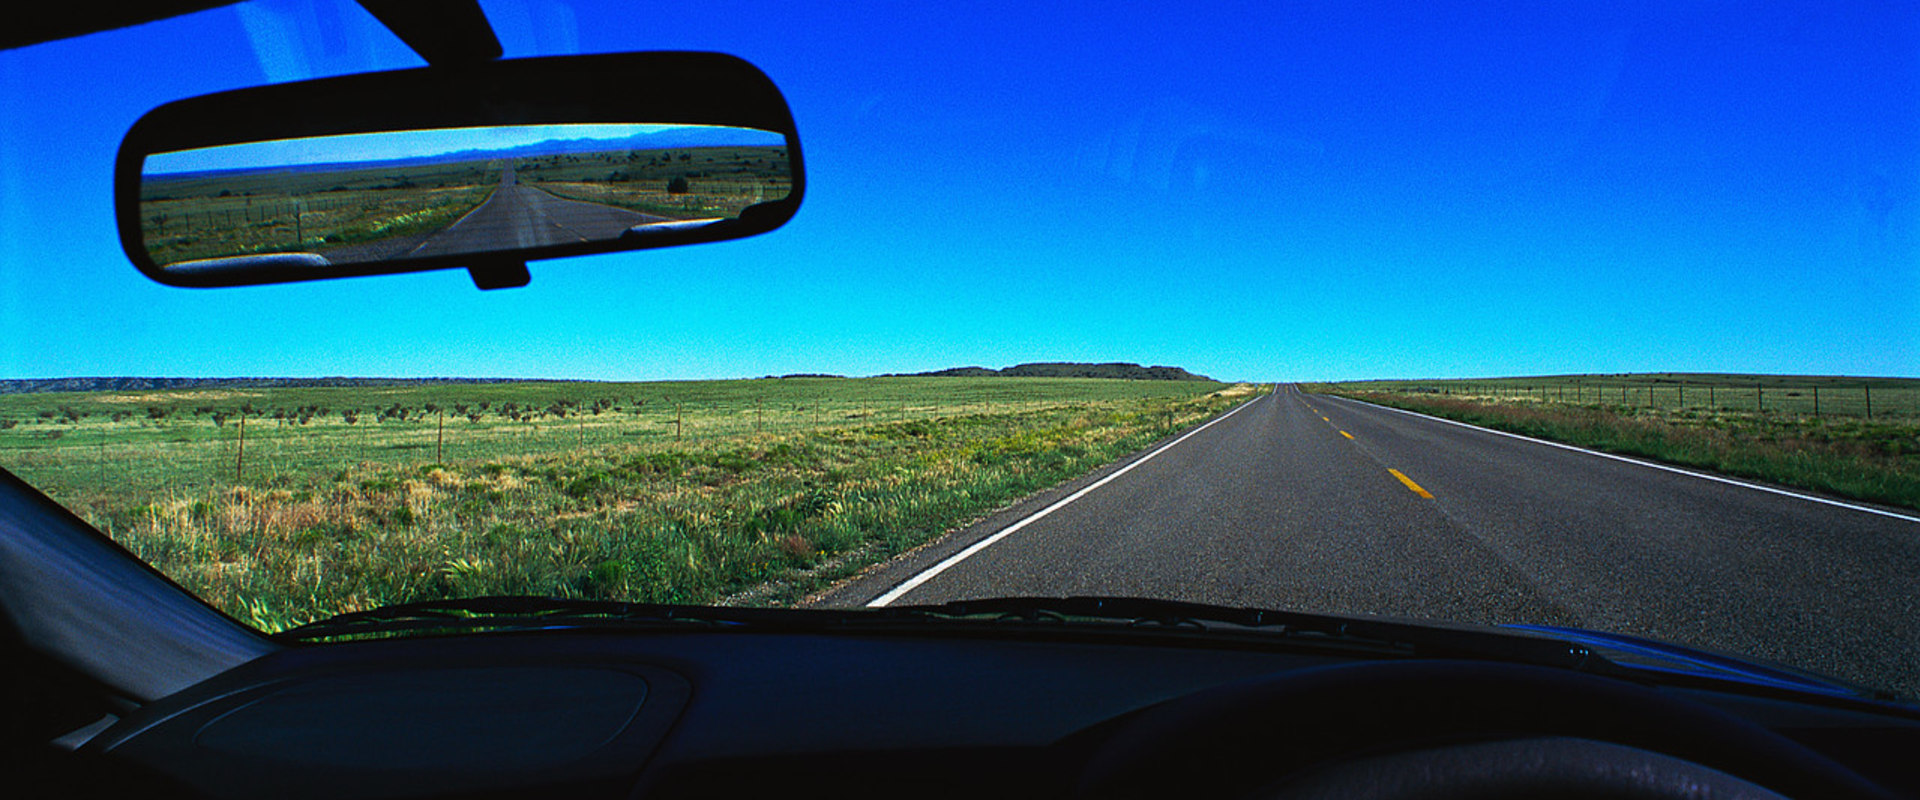 Windshields and Mirrors: An Overview